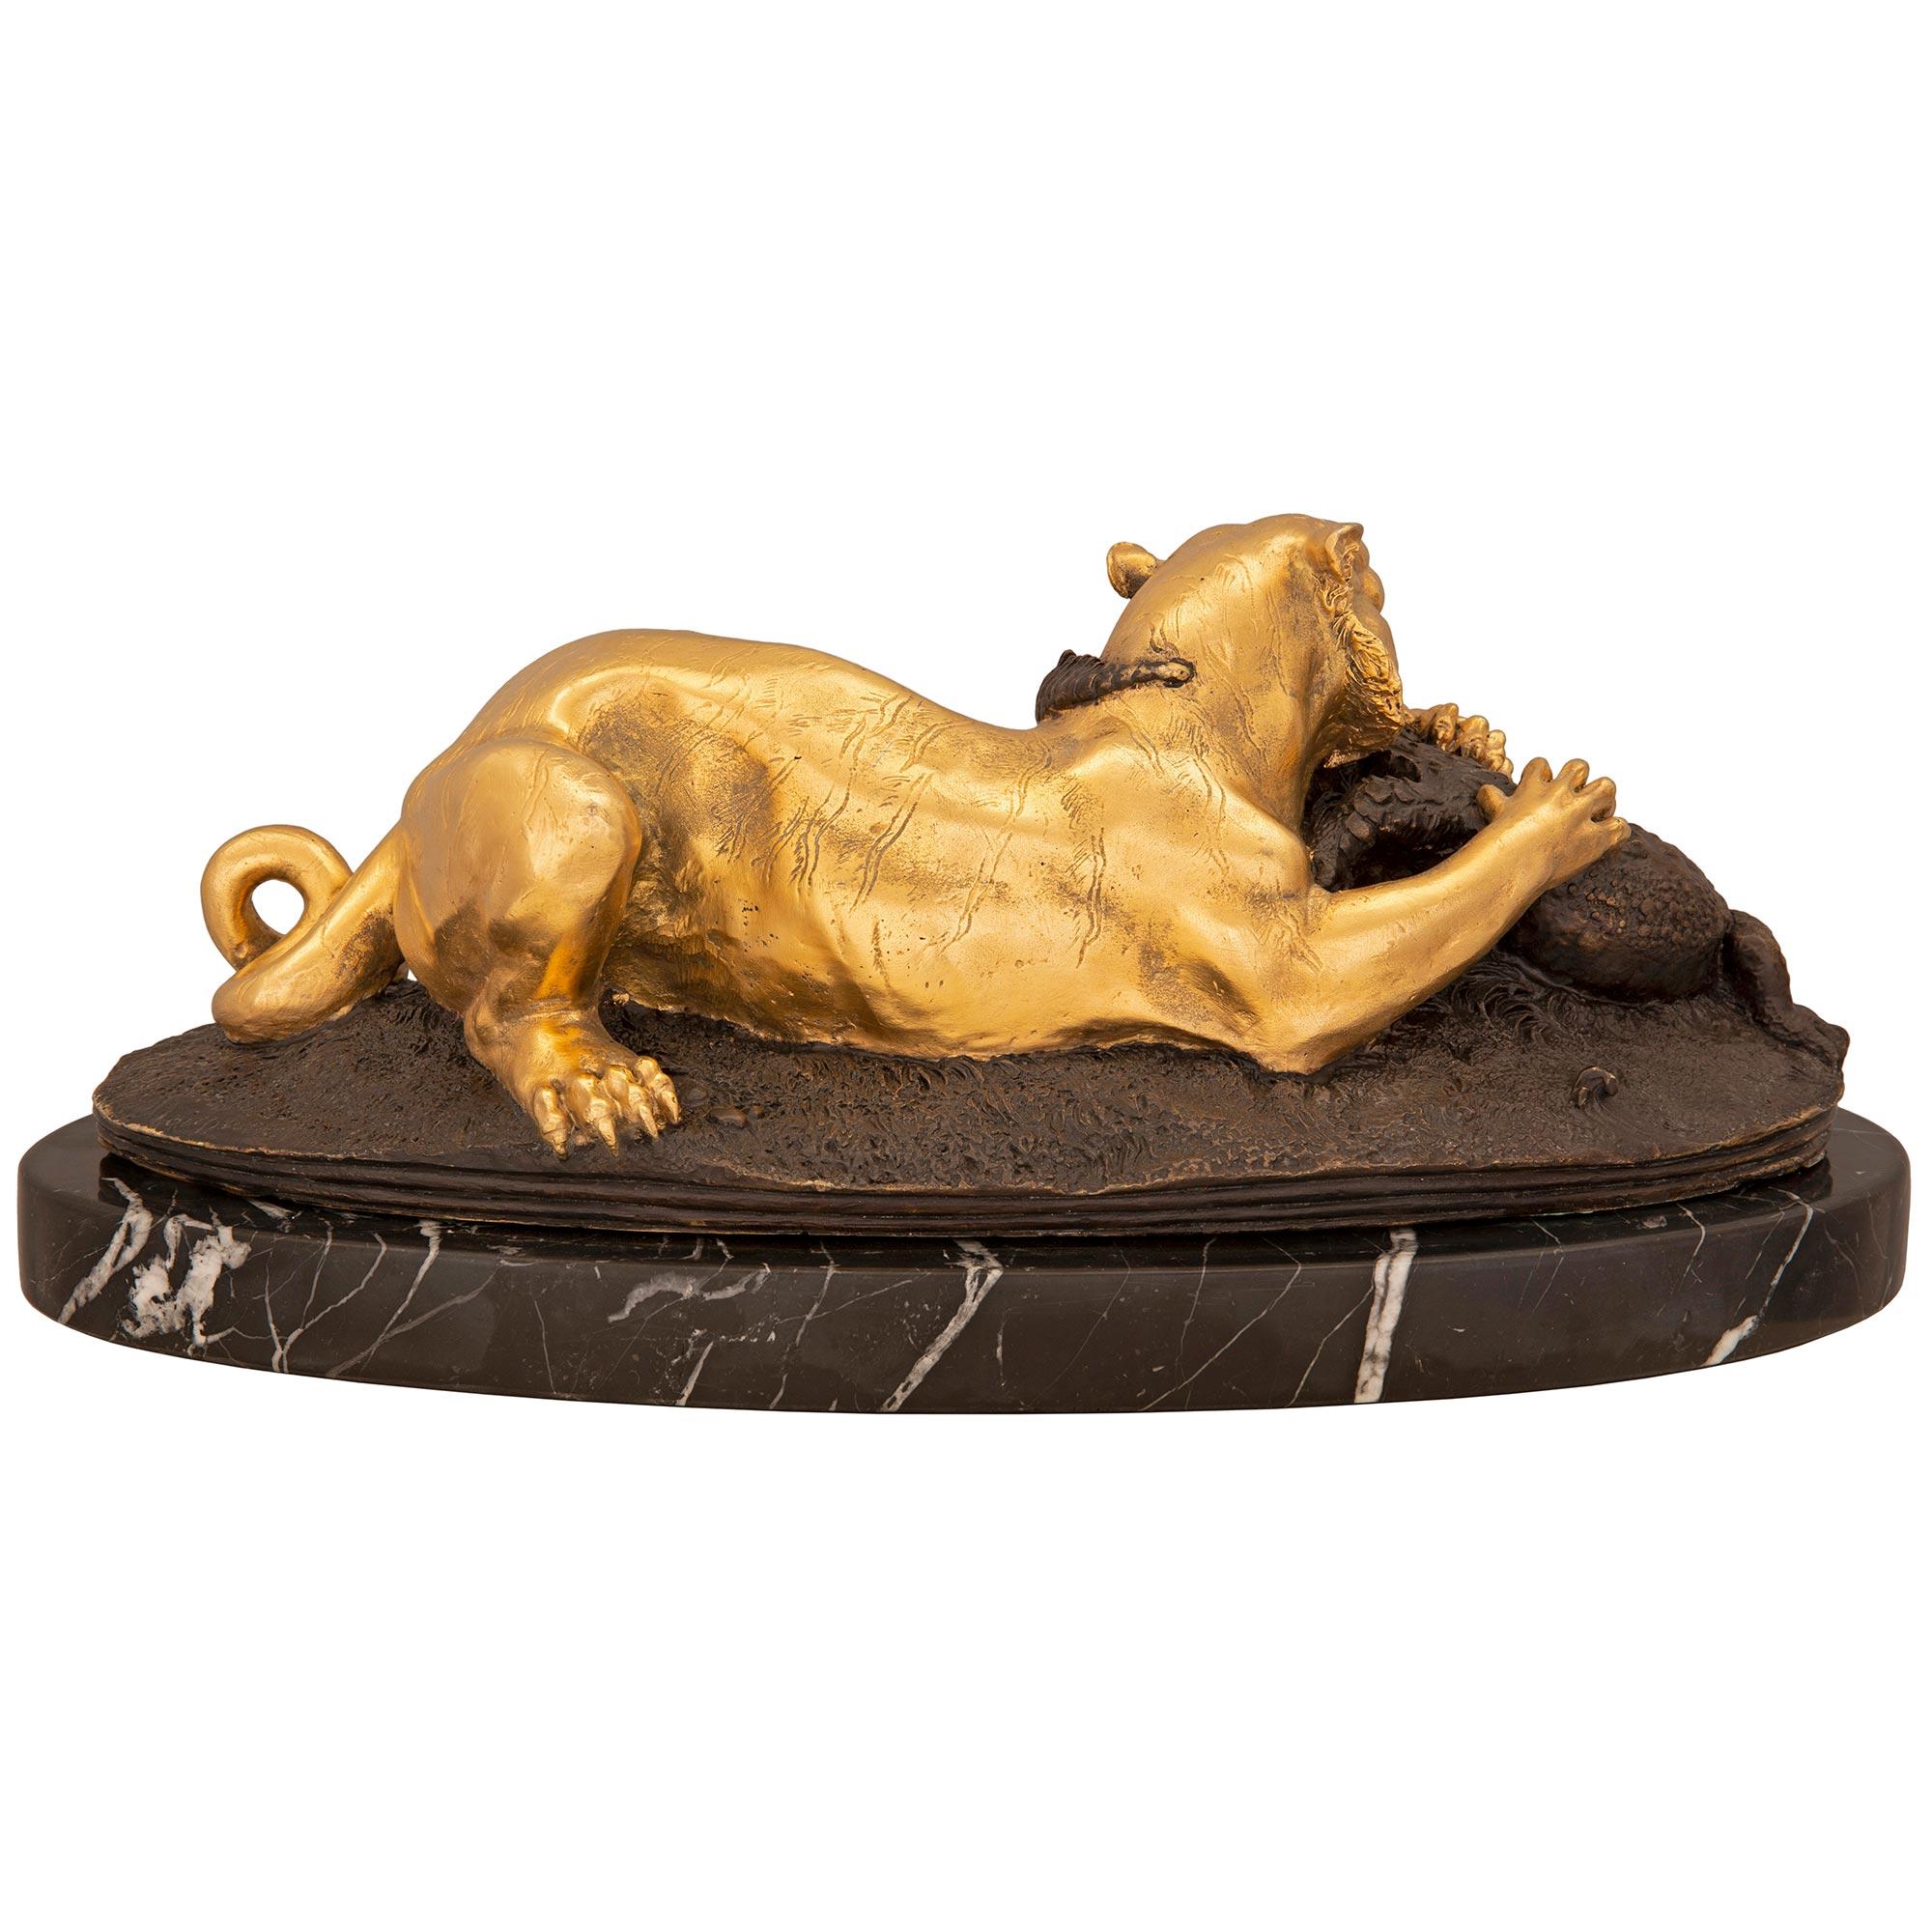 French 19th Century Bronze and Ormolu Statue of a Panther Eating an Alligator For Sale 1